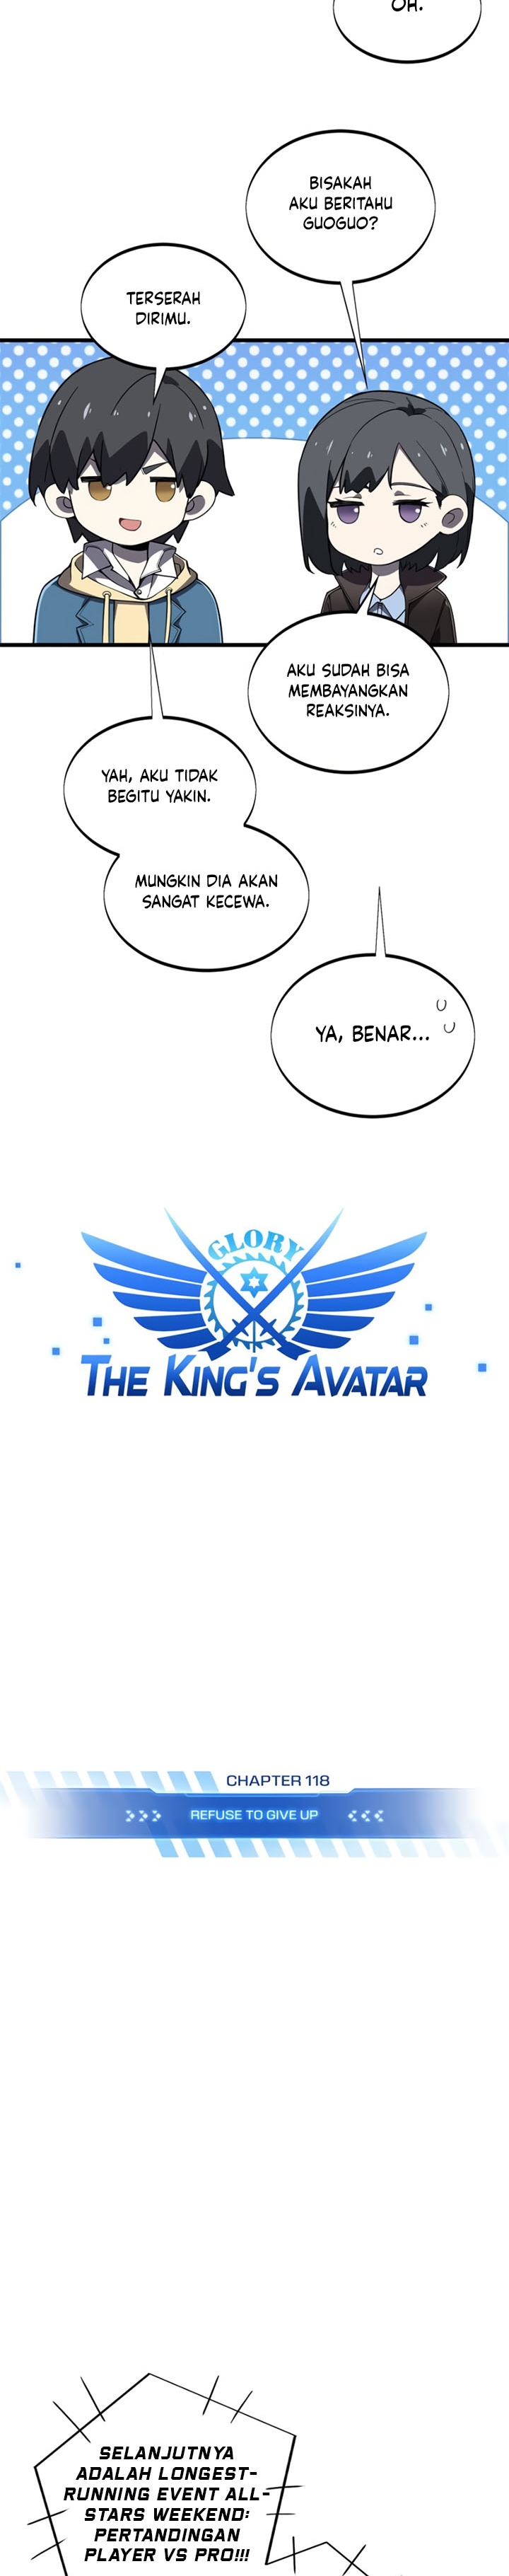 The King’s Avatar (2020) Chapter 118